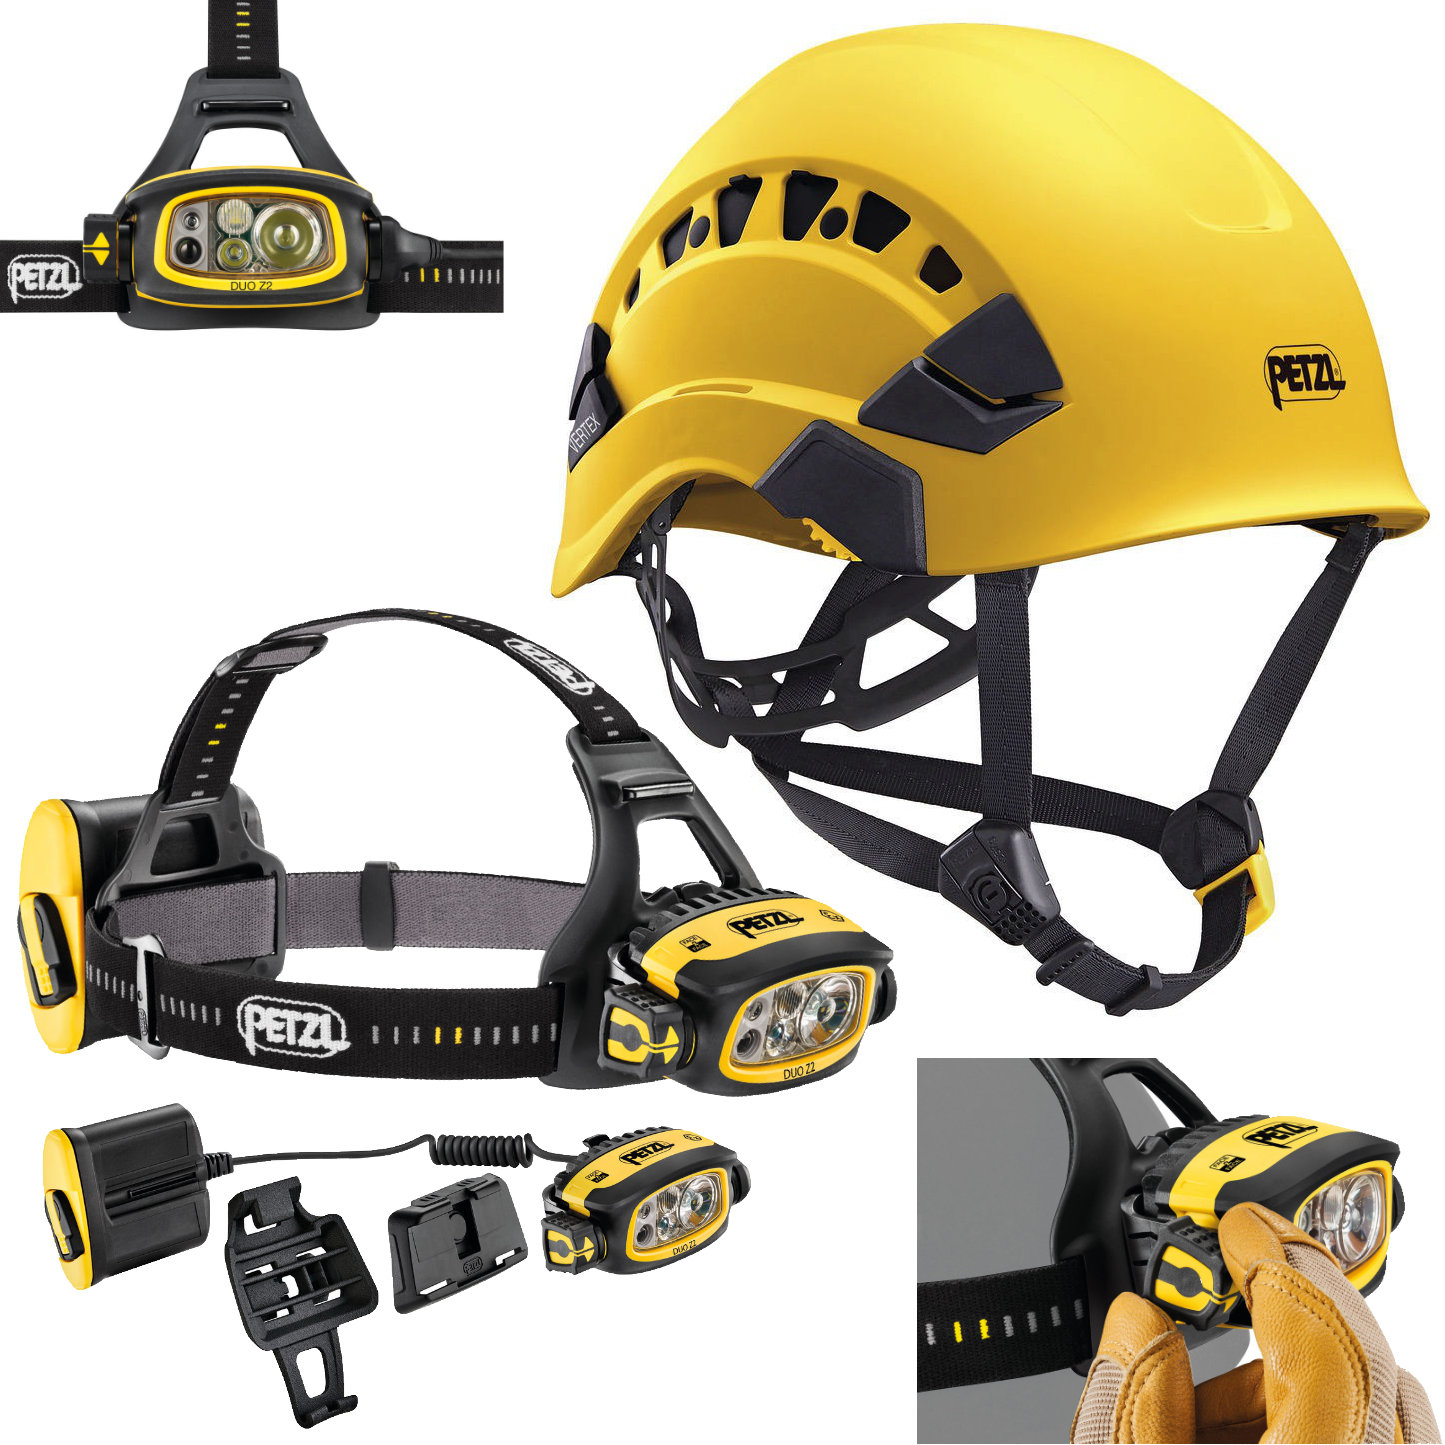 Purchase Petzl Vertex Vent Yellow Helmet  DUO Z2 Headlamp online today.  Best PPE and safety products in Australia.